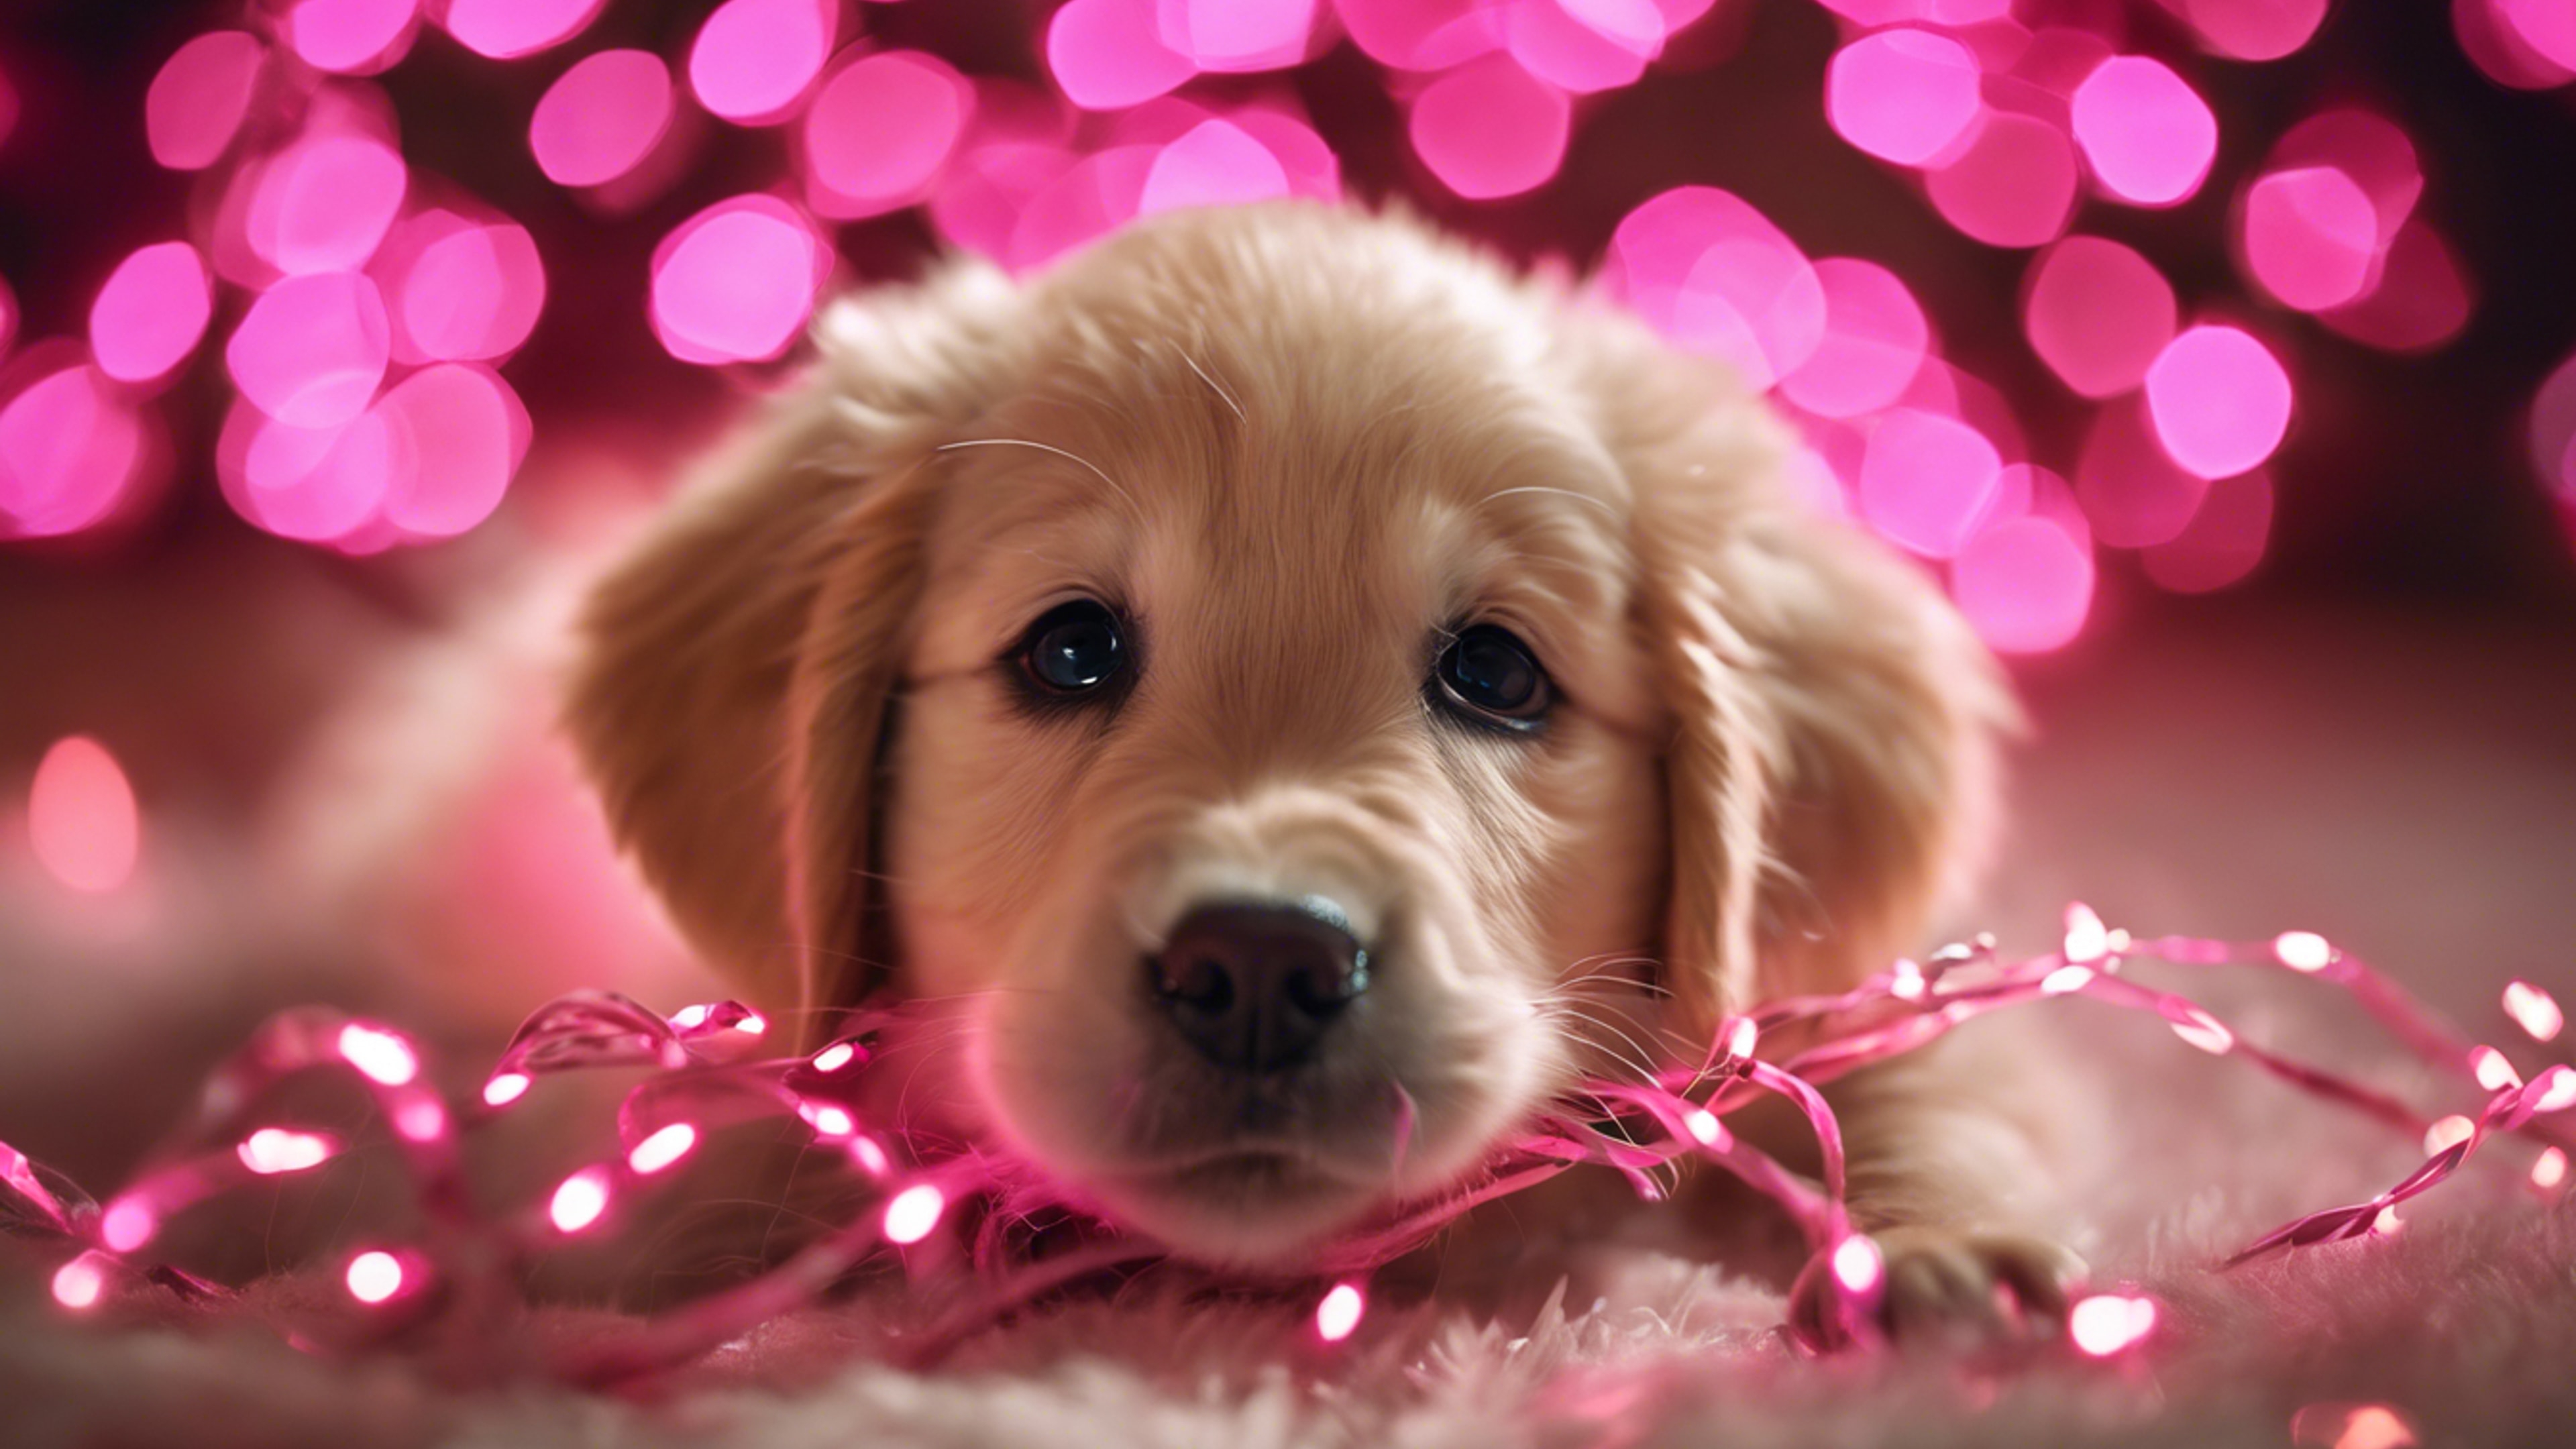 A golden retriever puppy adorably tangled in pink Christmas lights. Tapet[26994d3815c0460ab11e]